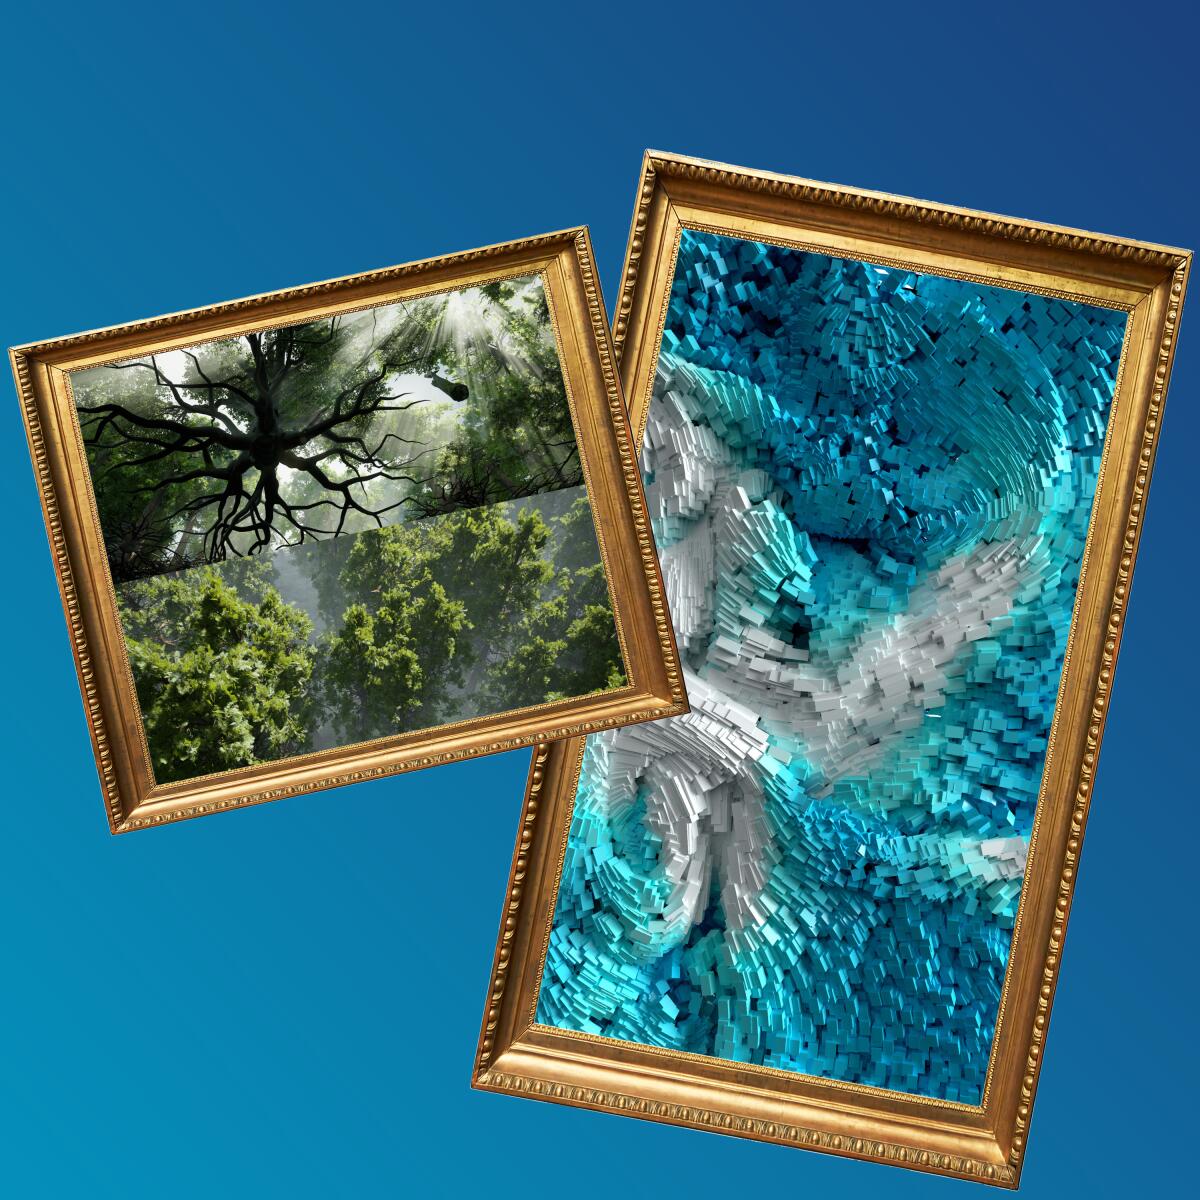 Artwork showing trees on the left and abstract wind projections in blue on the right.